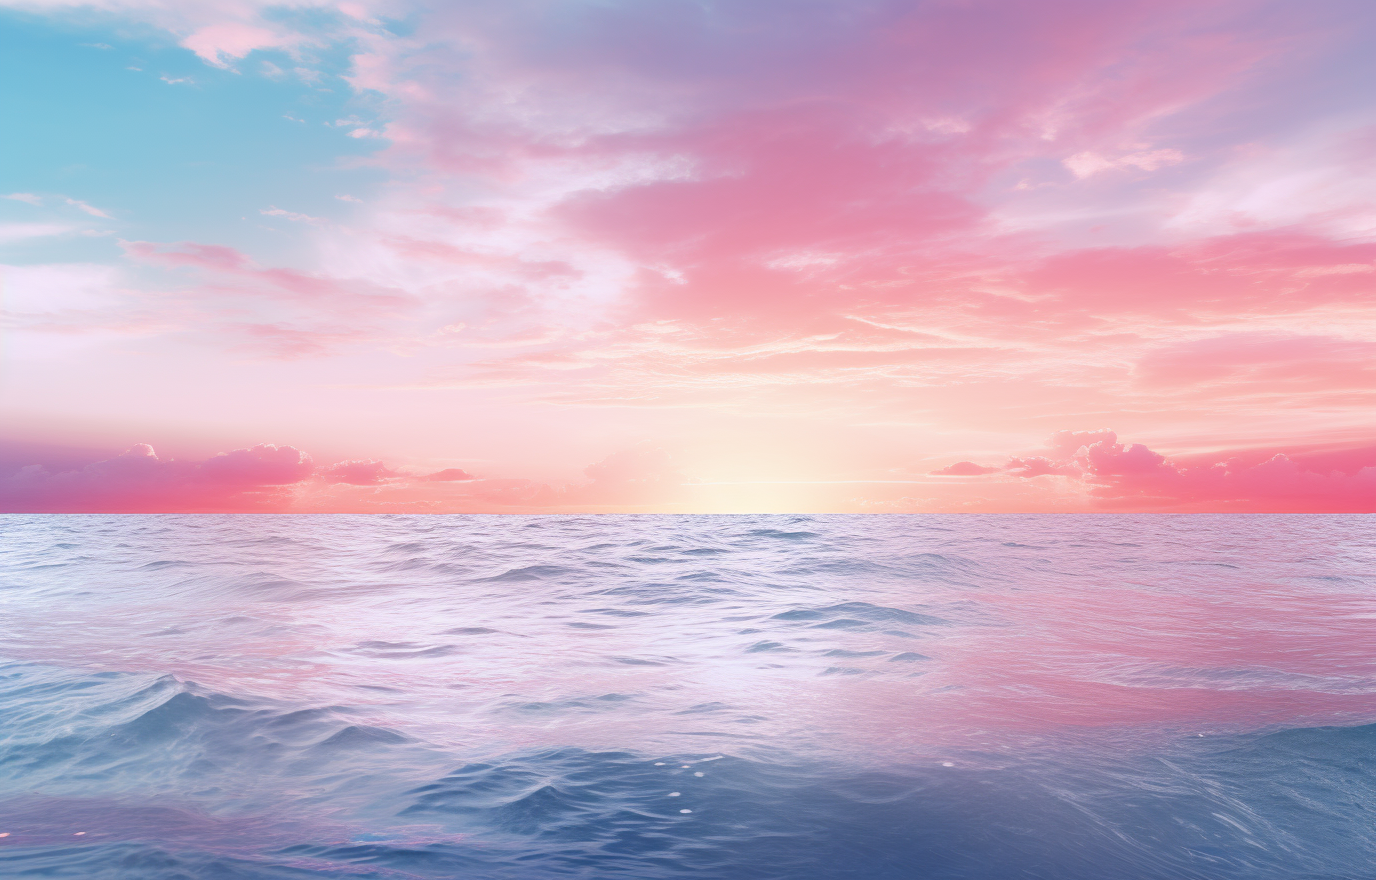 Sunset over the ocean with pink and blue sky